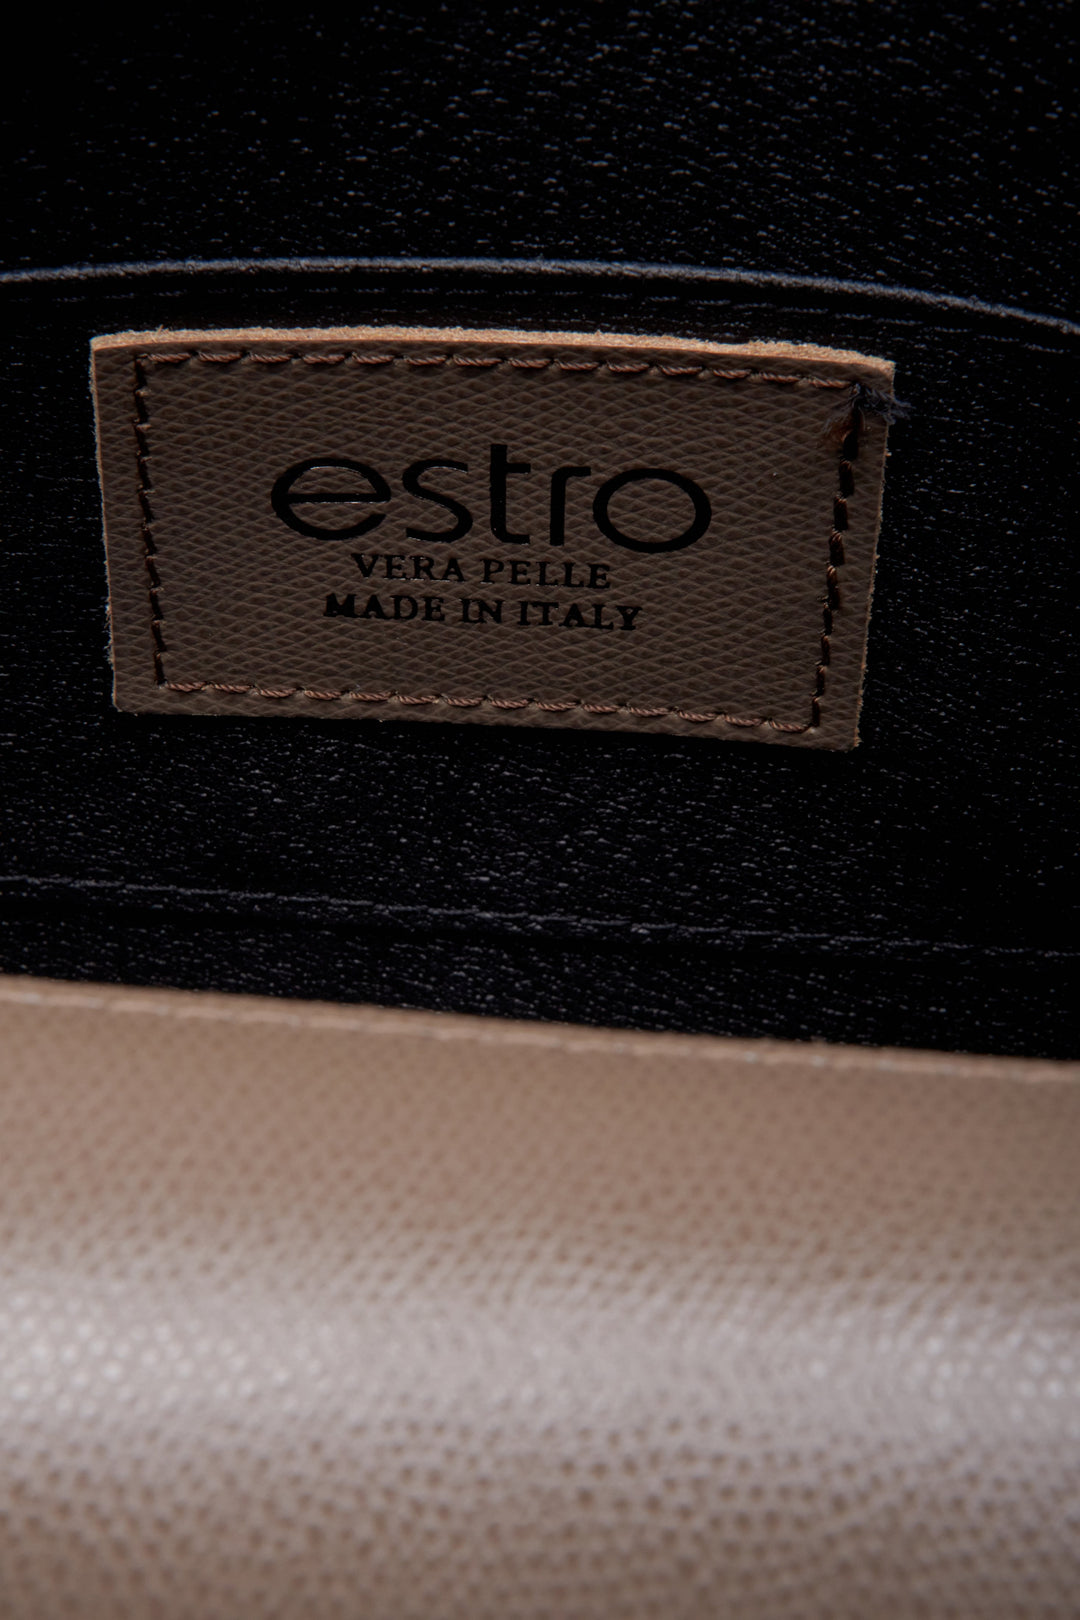 Women's brown leather handbag by Estro - close-up on details.